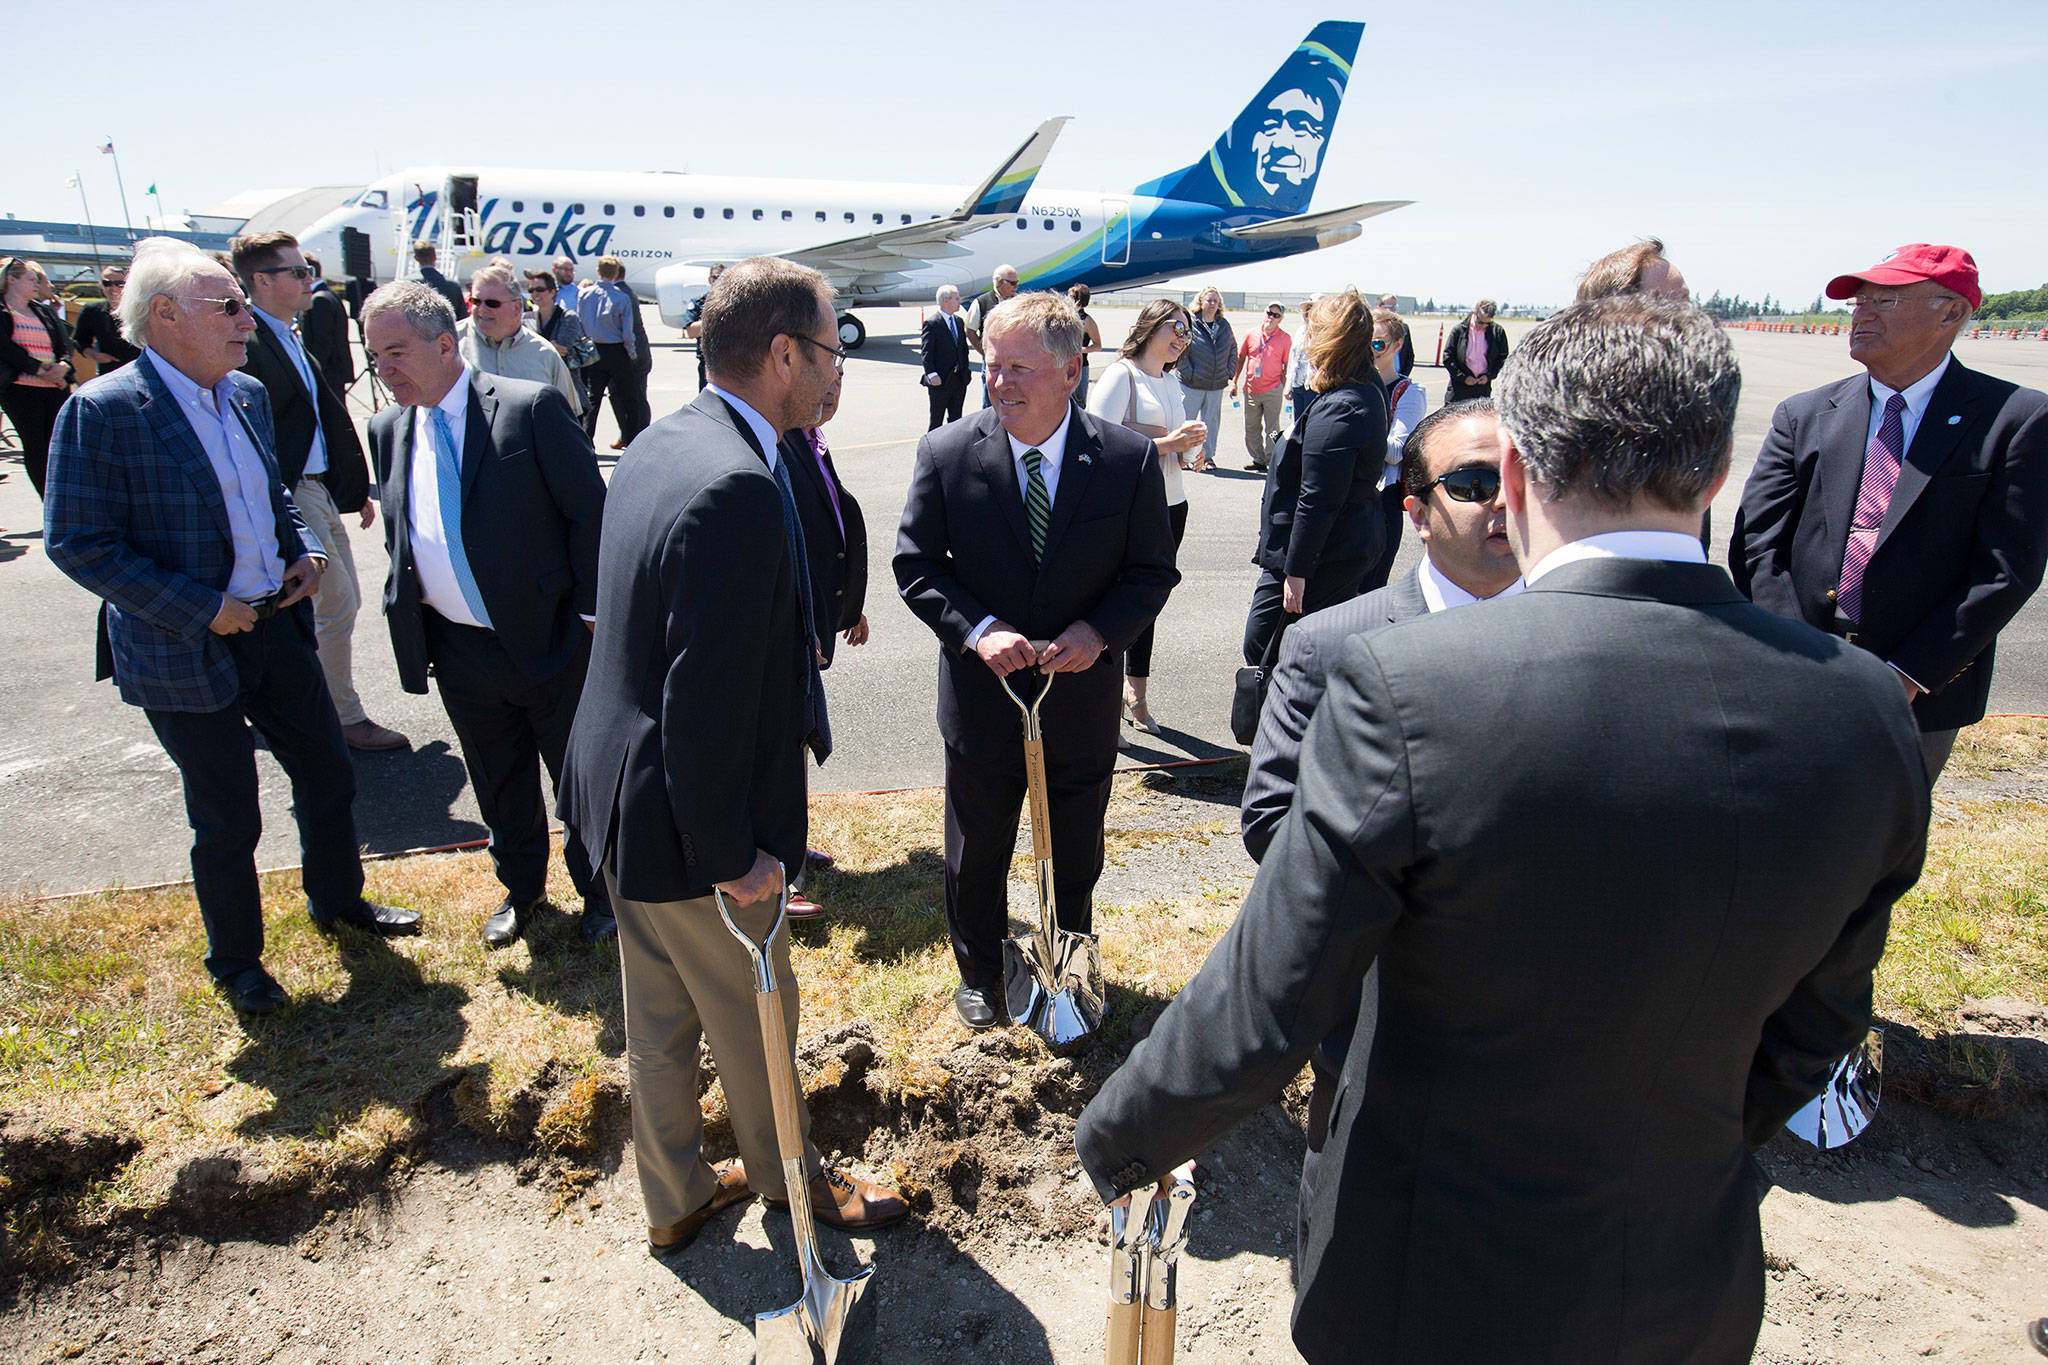 Everett Mayor Ray Stephanson (center) talks with Alaska Airlines Inc. CEO Brad Tilden after the groundbreaking ceremony for the new Paine Field passenger terminal June 5 in Everett. (Andy Bronson / Herald file)